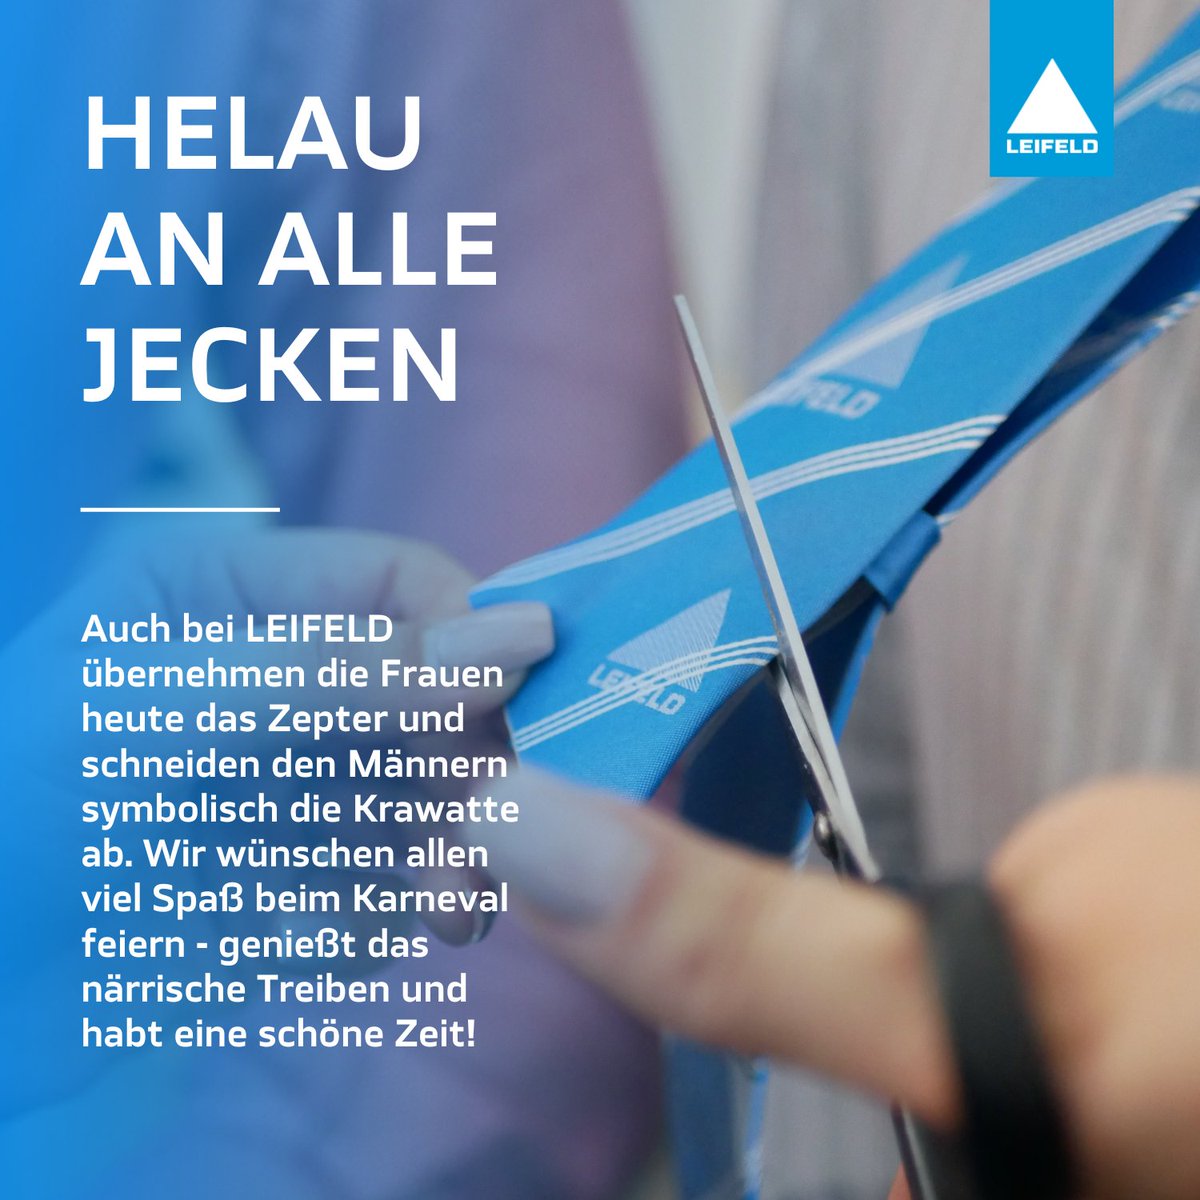 🎉 “Helau” to all the revelers! Today is Women's Carnival, a day full of fun, merriment, and of course, a very special tradition: cutting off ties! 👔✂️ 🥳 Let's enjoy the festive revelry together and have loads of fun. #karneval #altweiber #krawatte #teamleifeld #tradition